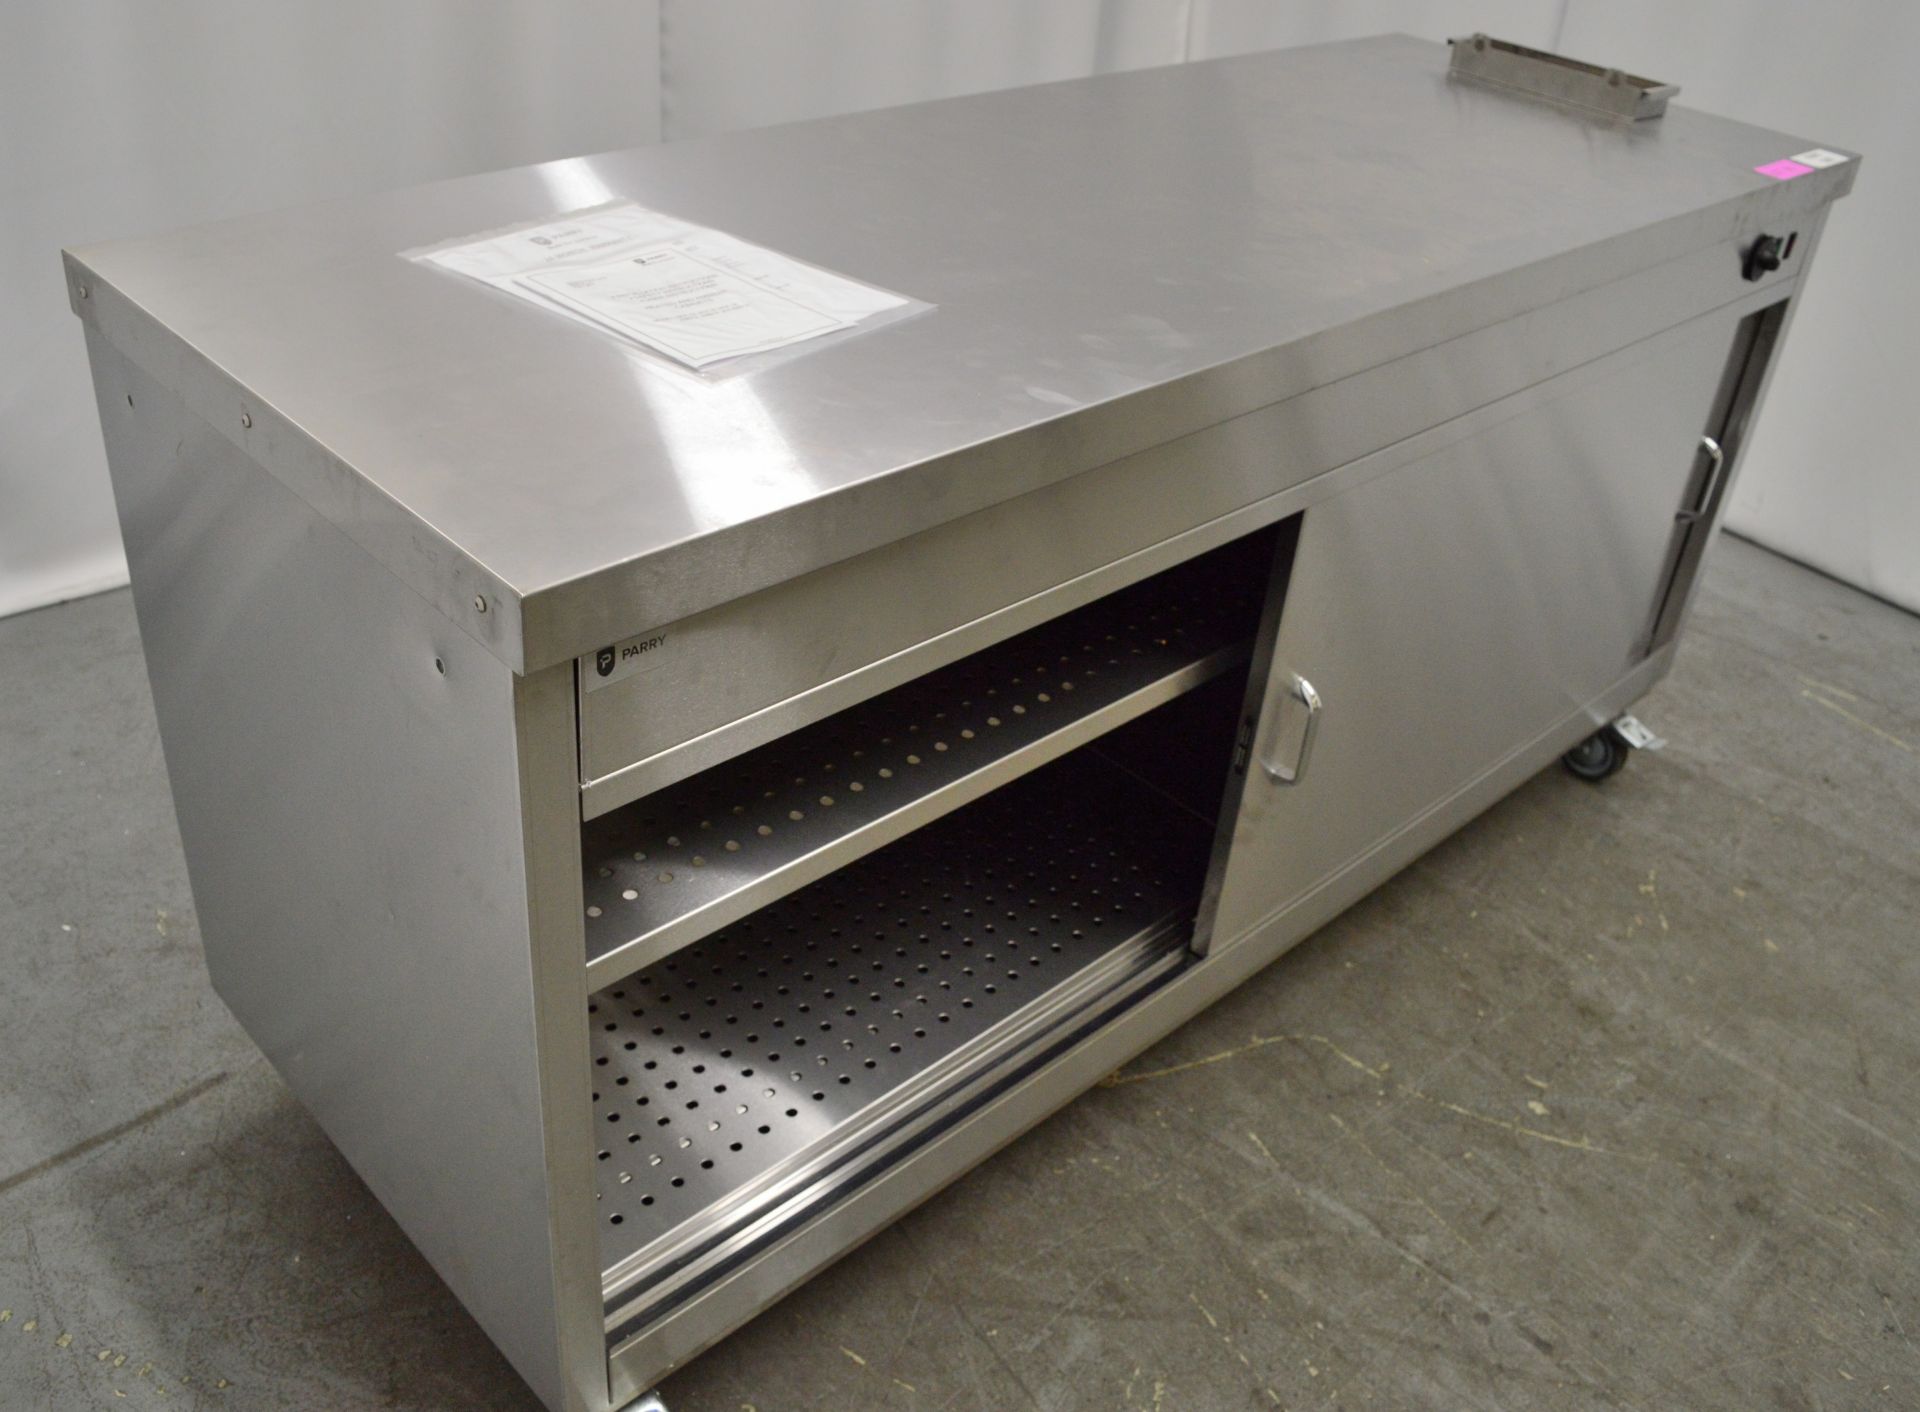 Parry HOT18 stainless steel hot cupboard, 1800x650x900mm (LxDxH) 230v - Image 3 of 6